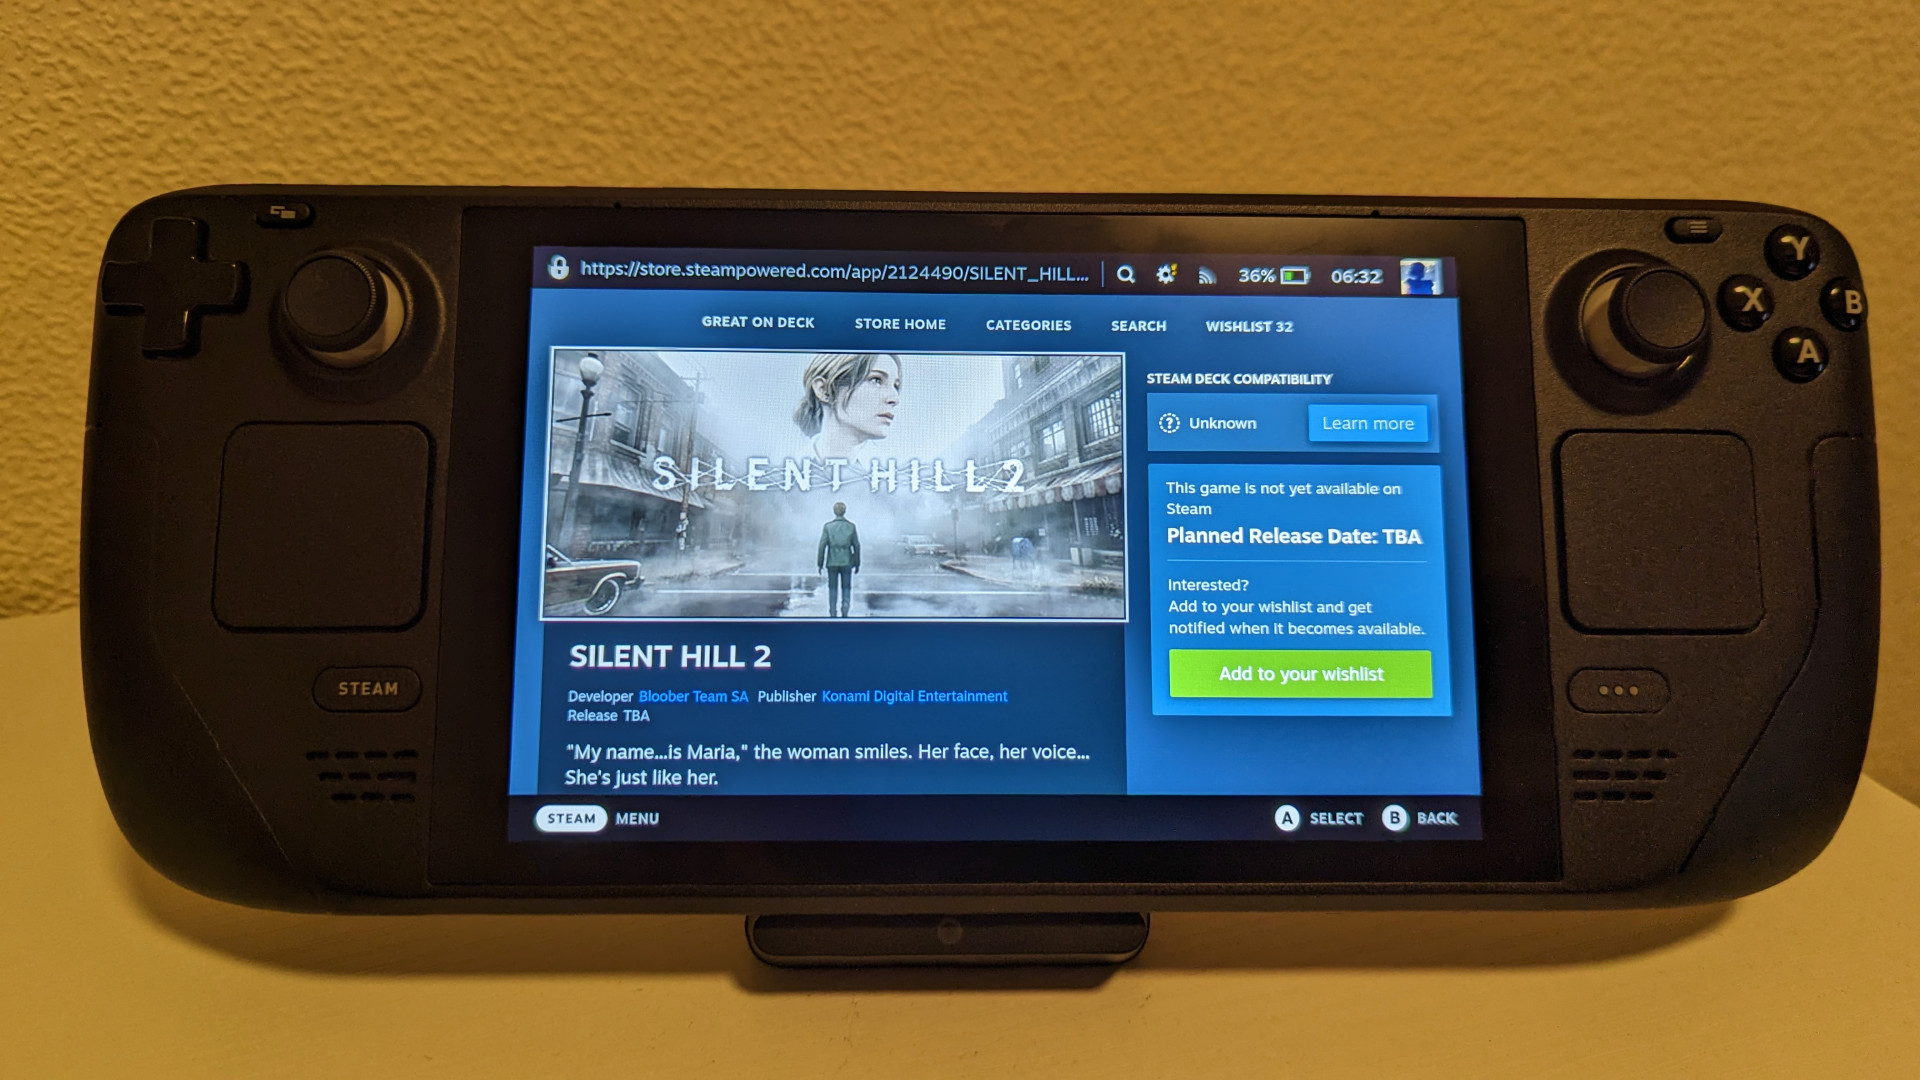 A Steam Deck showing the Silent Hill 2 Steam store page